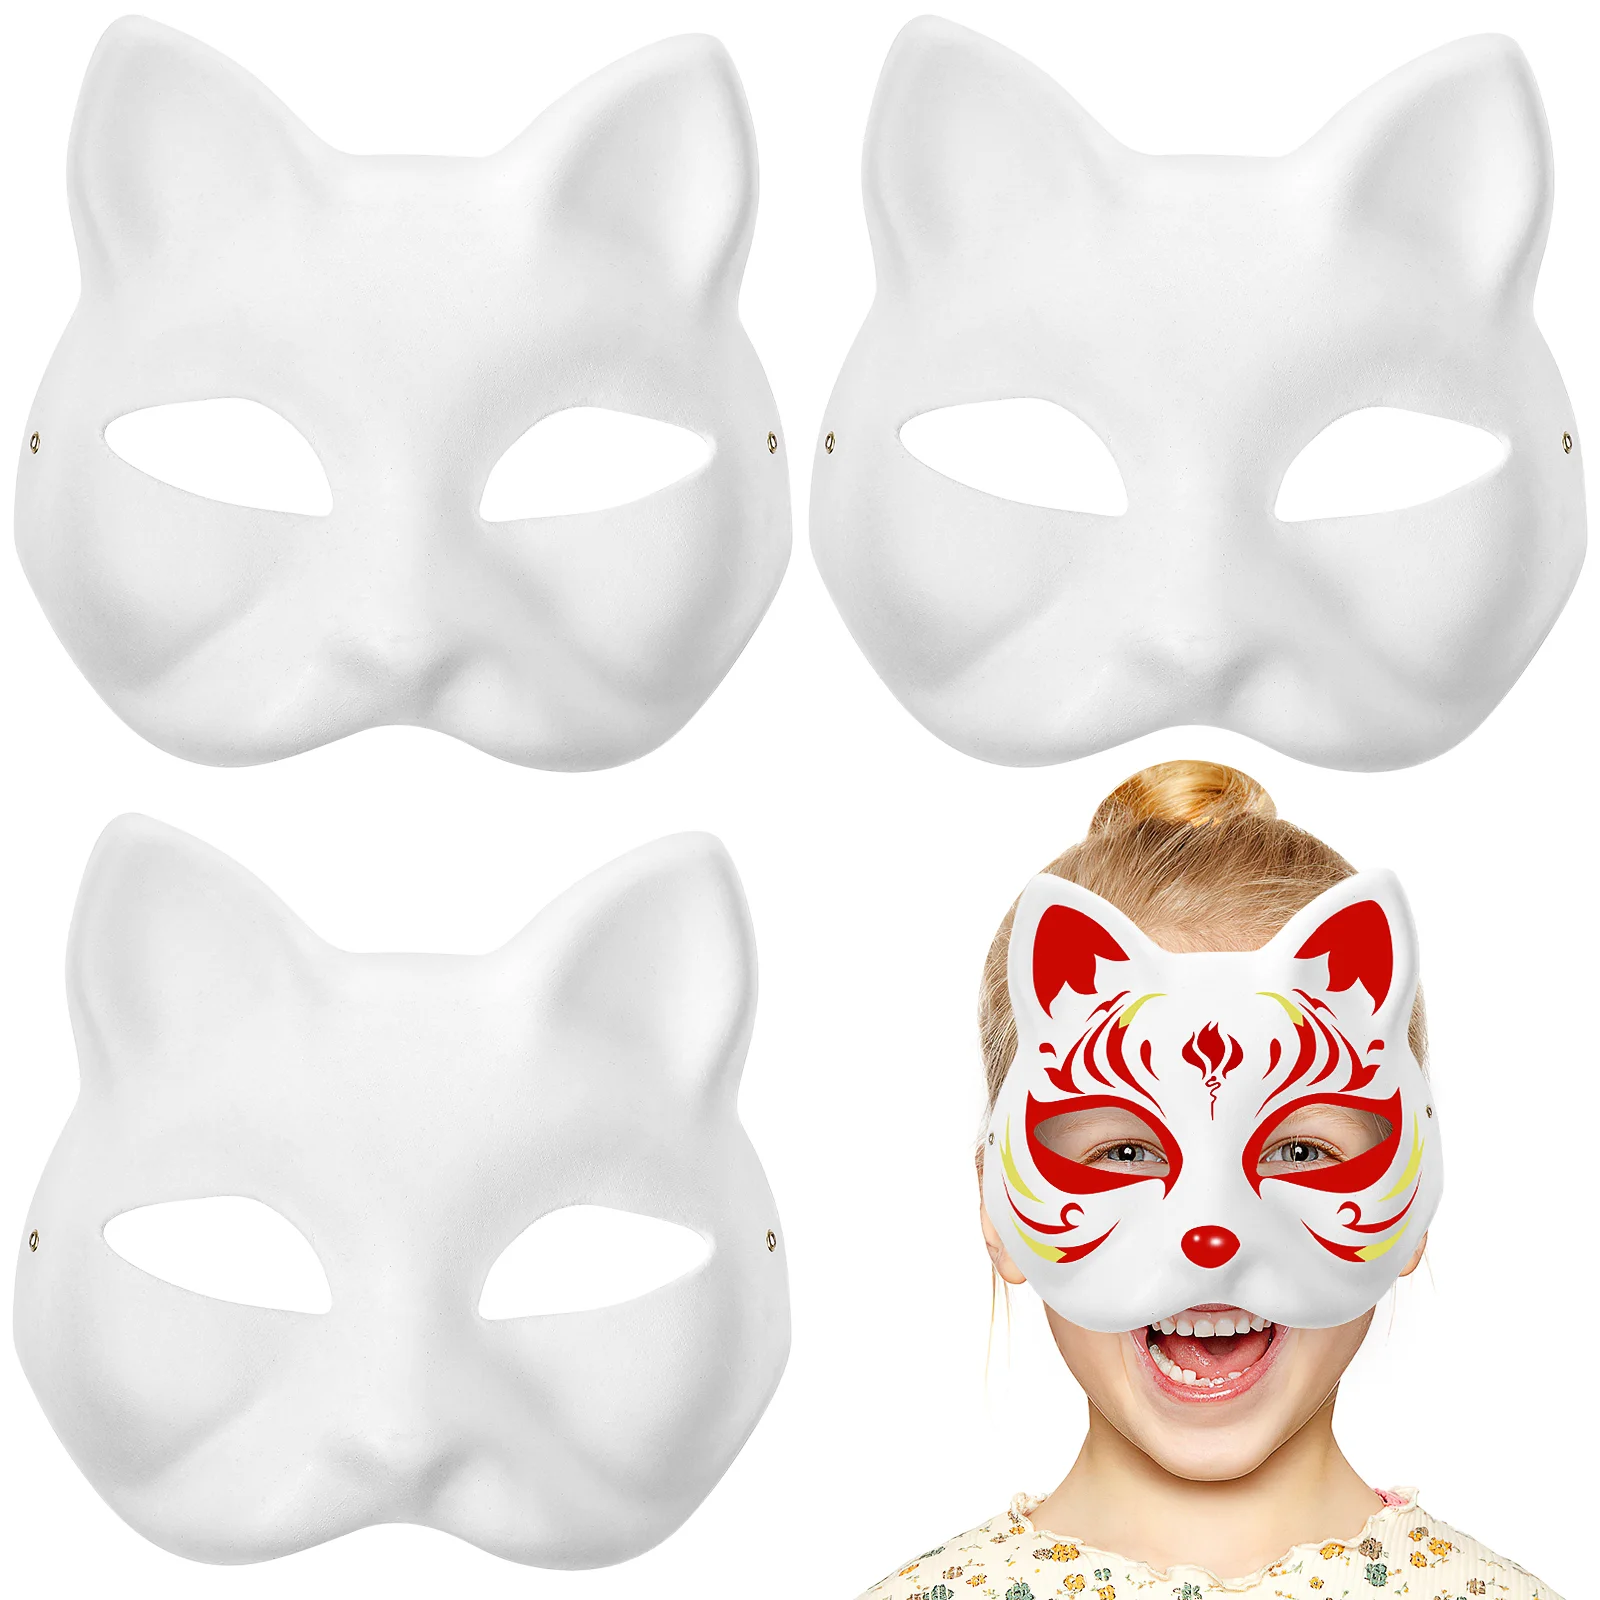 

Masks Mask Cat Blank White Diy Masquerade Face Party Cosplay Halloween Paper Unpainted Animal Half Adults Costume Decorate